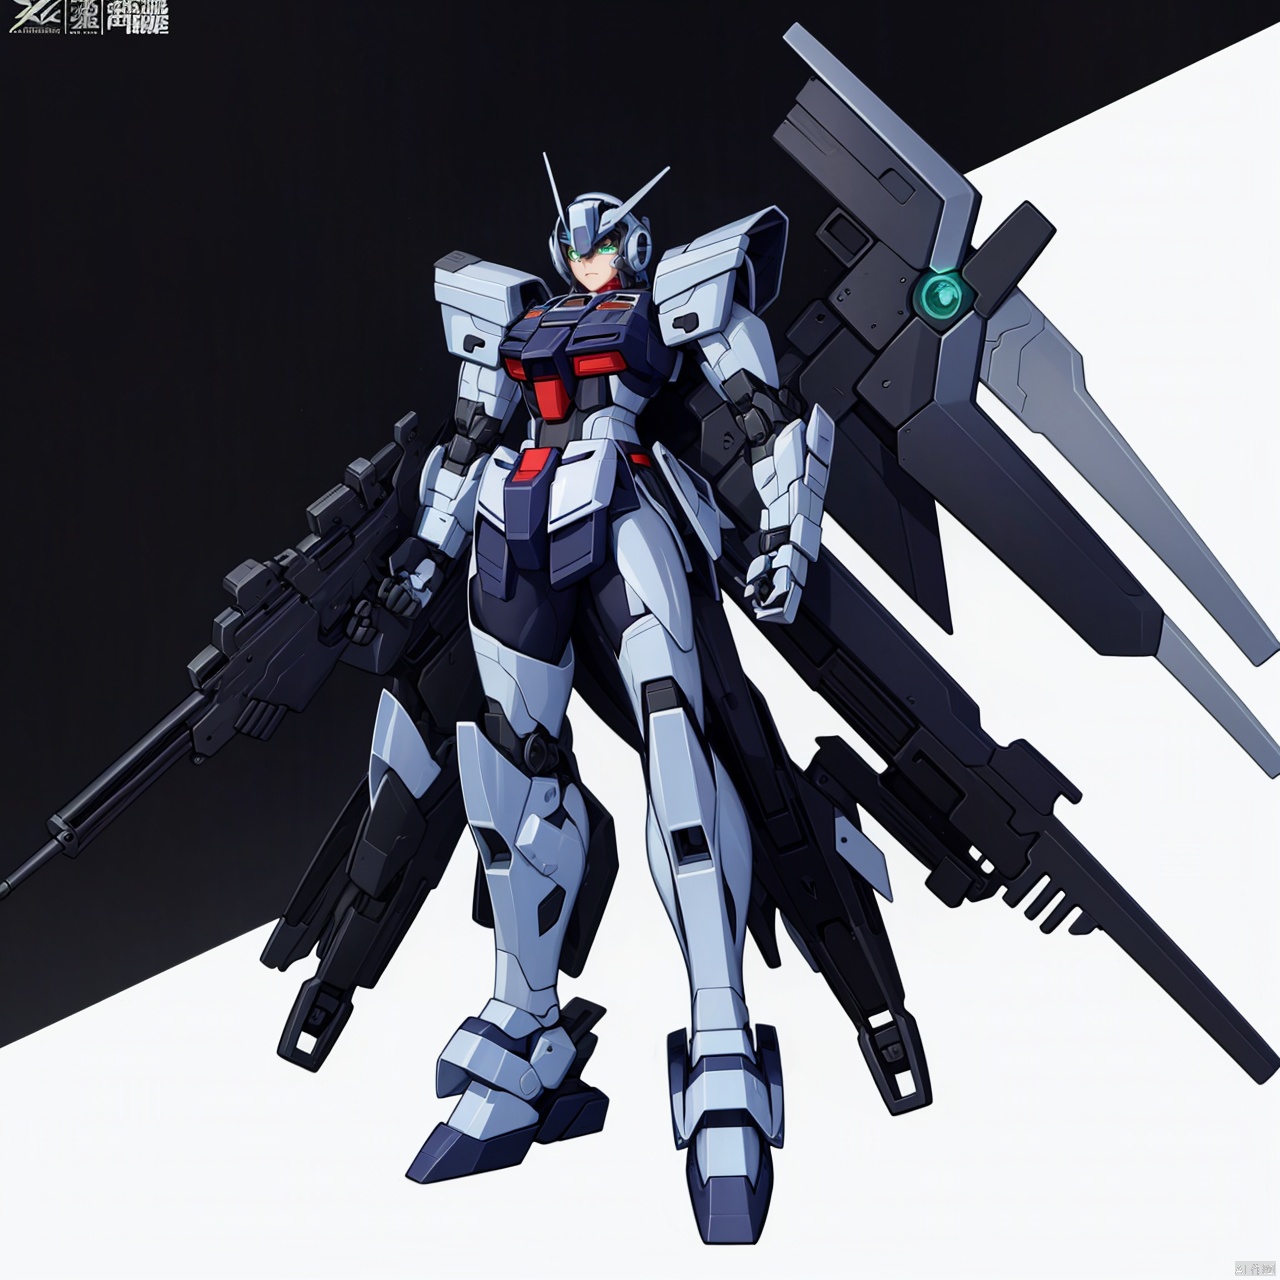 (masterpiece:1.3), (the best quality:1.2), (super fine illustrations:1.2), (Masterpiece), high quality, high detail, (white background:1.2), looking at viewer, (SOLO:1.4), outline, simplebackground, full body,
Gundam, solo, holding, green_eyes, weapon, wings, holding_weapon, gun, no_humans, glowing, robot, holding_gun, mecha, glowing_eyes, flying, science_fiction, mechanical_wings, v-fin, energy_gun, beam_rifle, cinematic lighting,strong contrast,Gundam,SRS,mechanical buddy universe
, fu hua, Anime